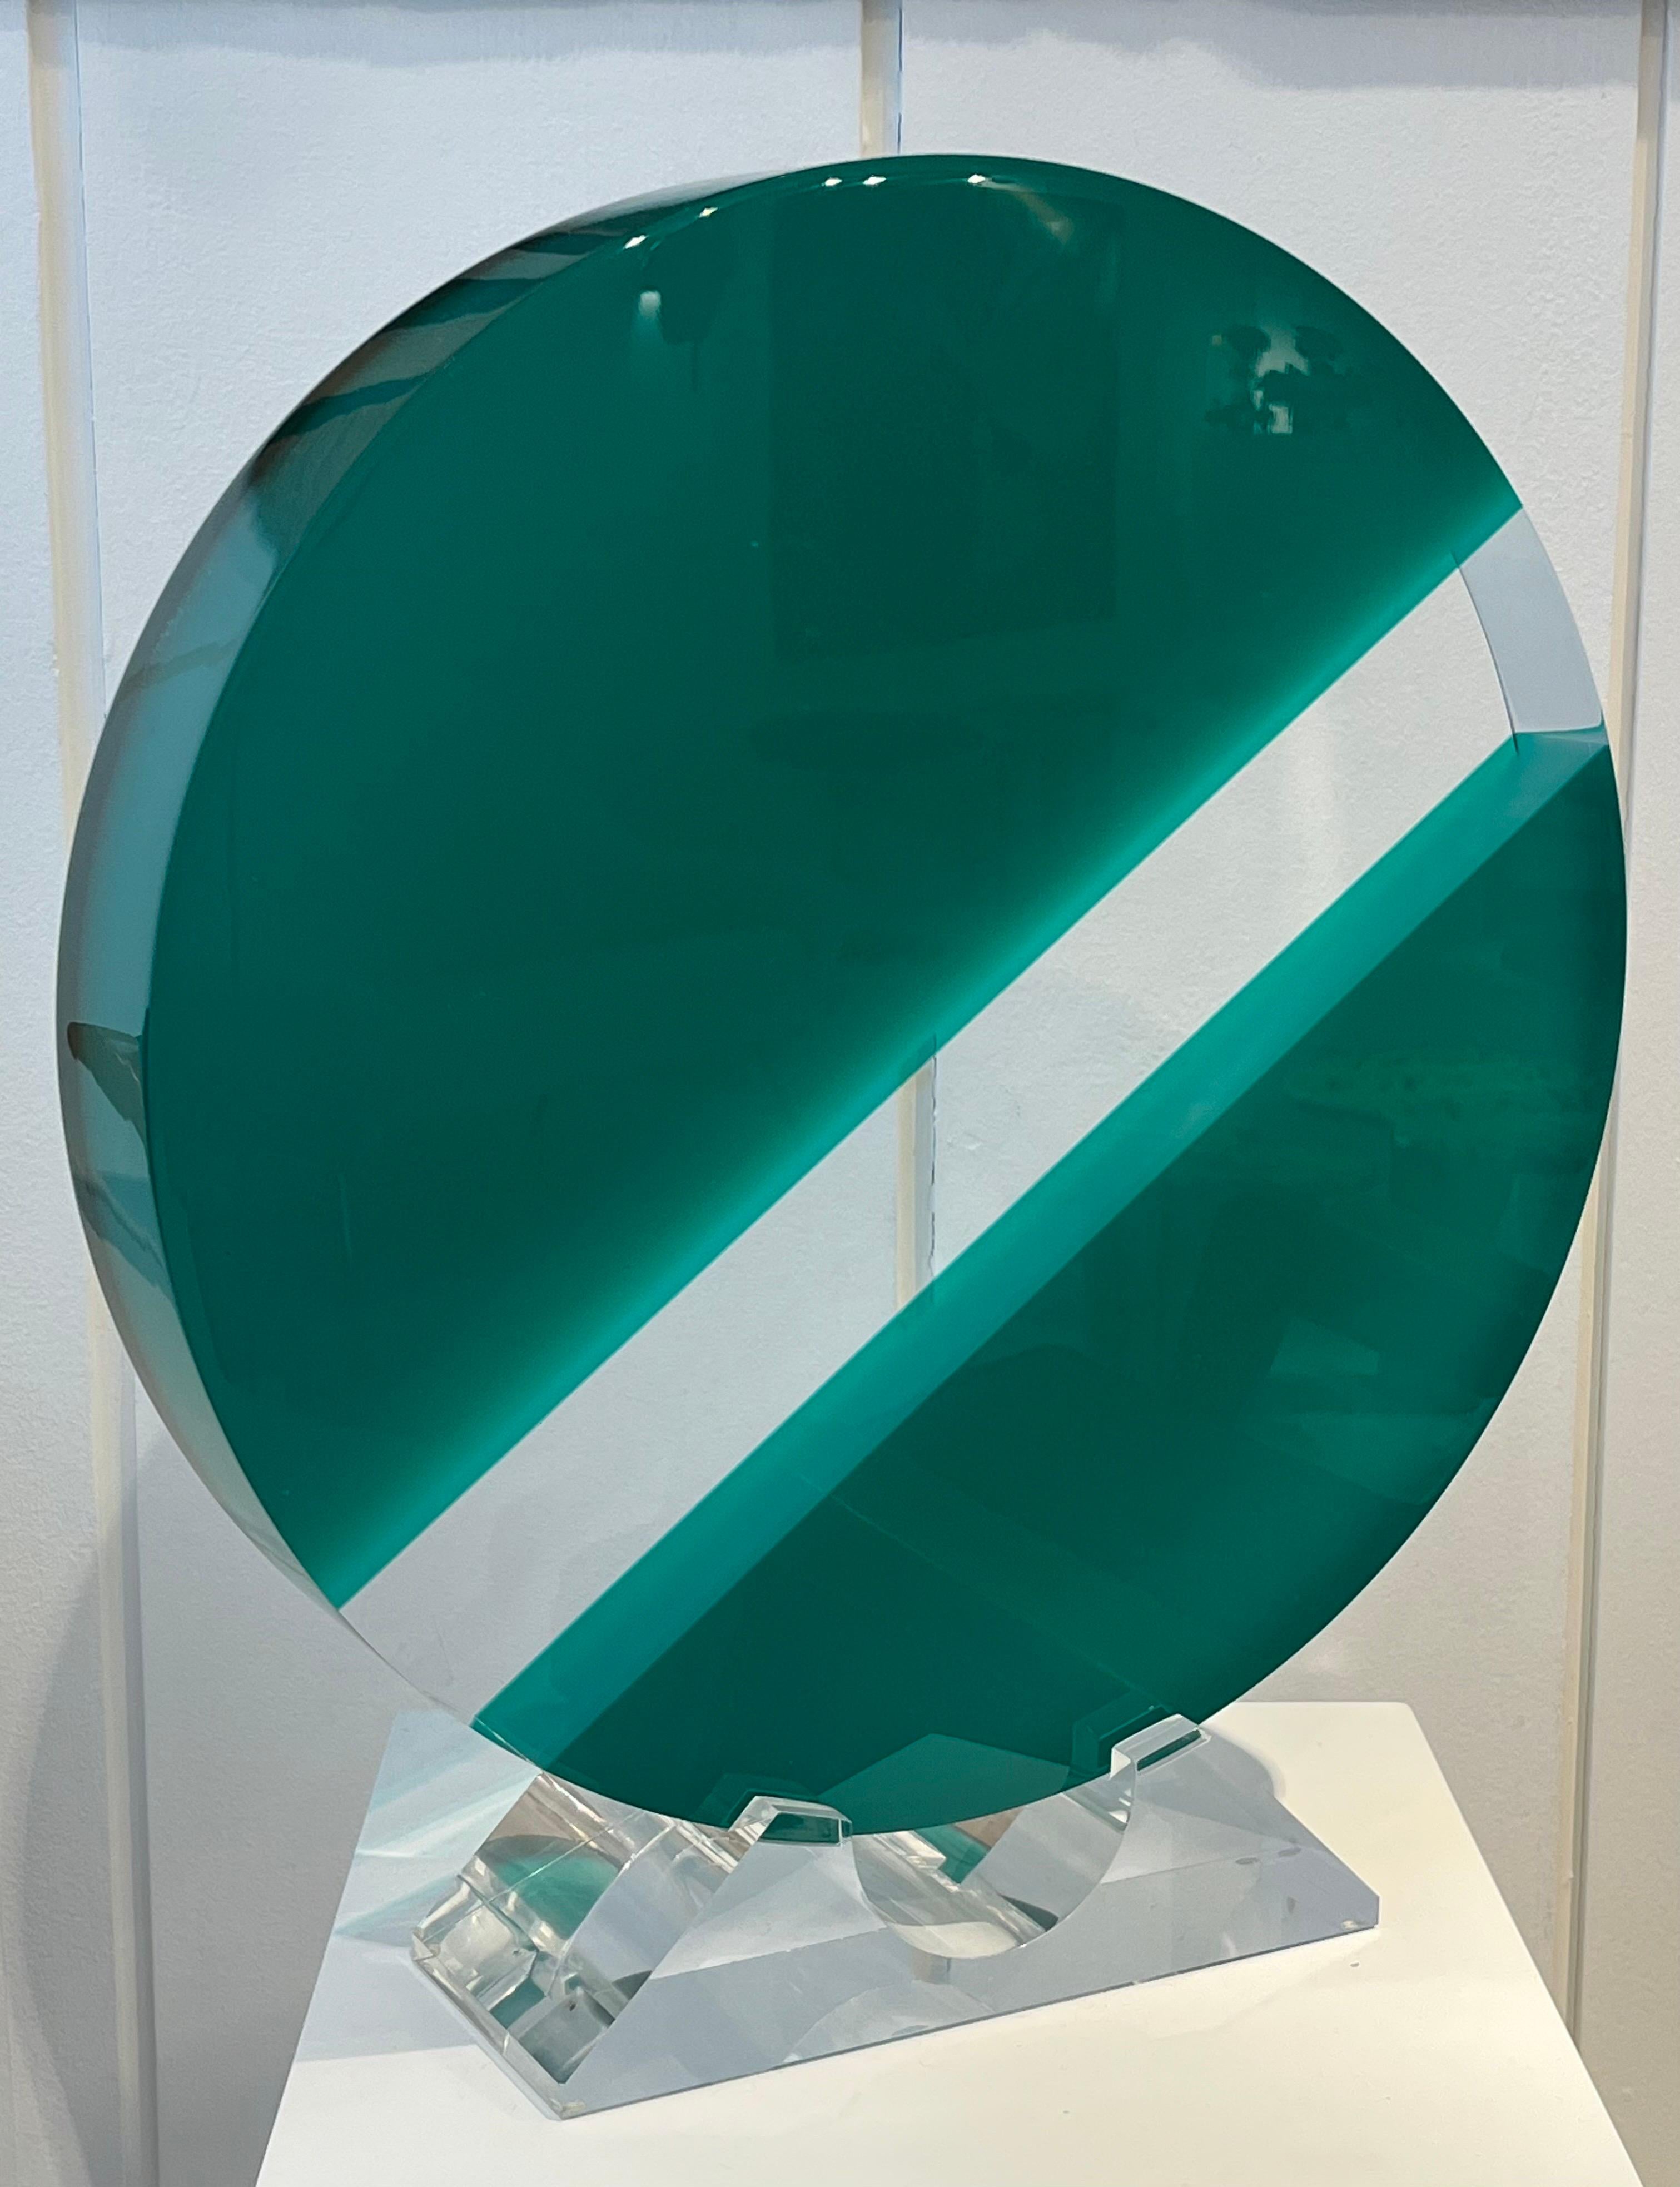 Lucite green and transparent disc sculpture by Jean Claude Farhi 
Signed and dated
Perfect condition.